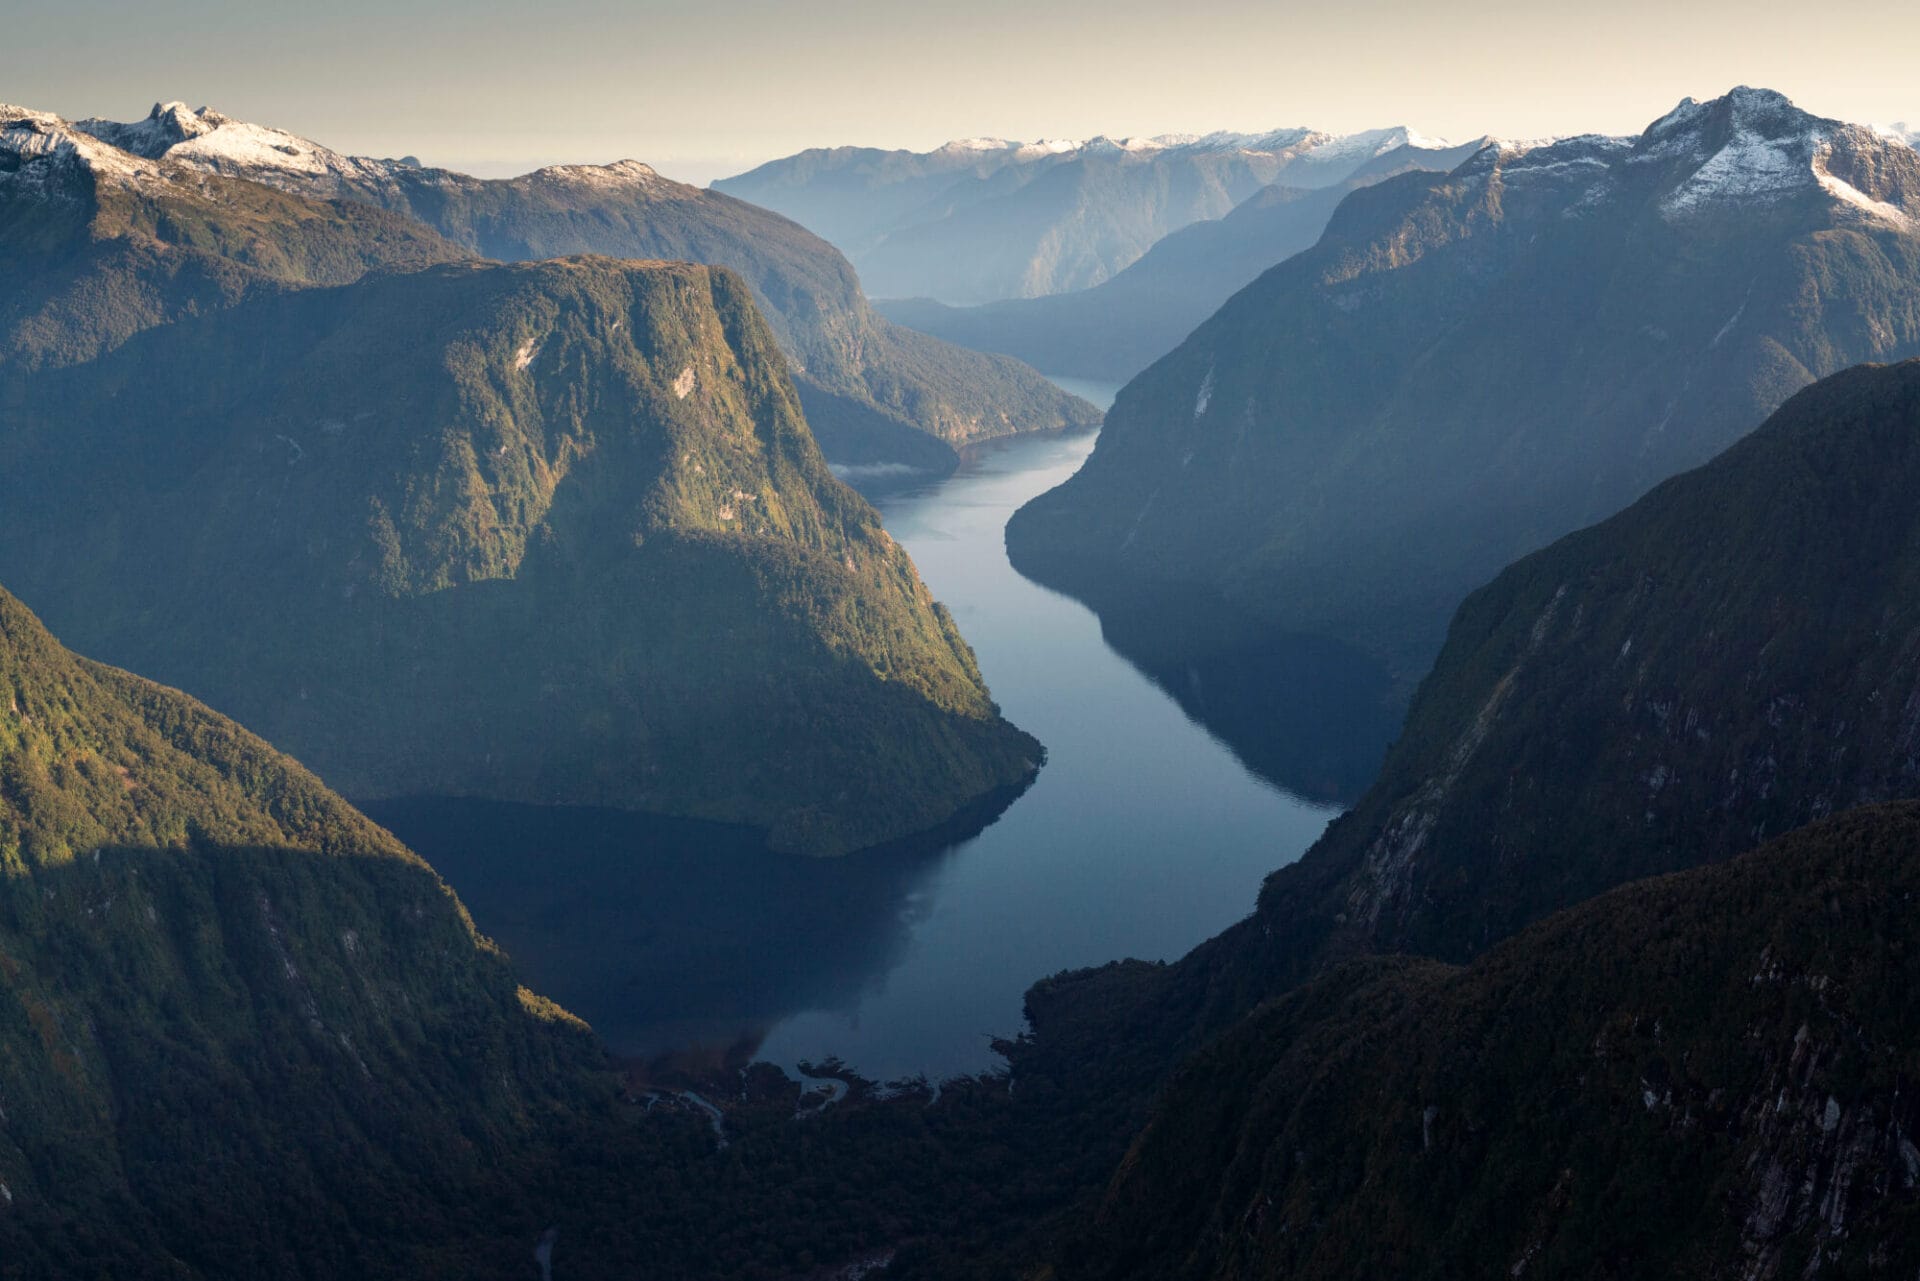 Aerial view of a serene fjord surrounded by rugged mountains with snow-capped peaks under a clear sky.